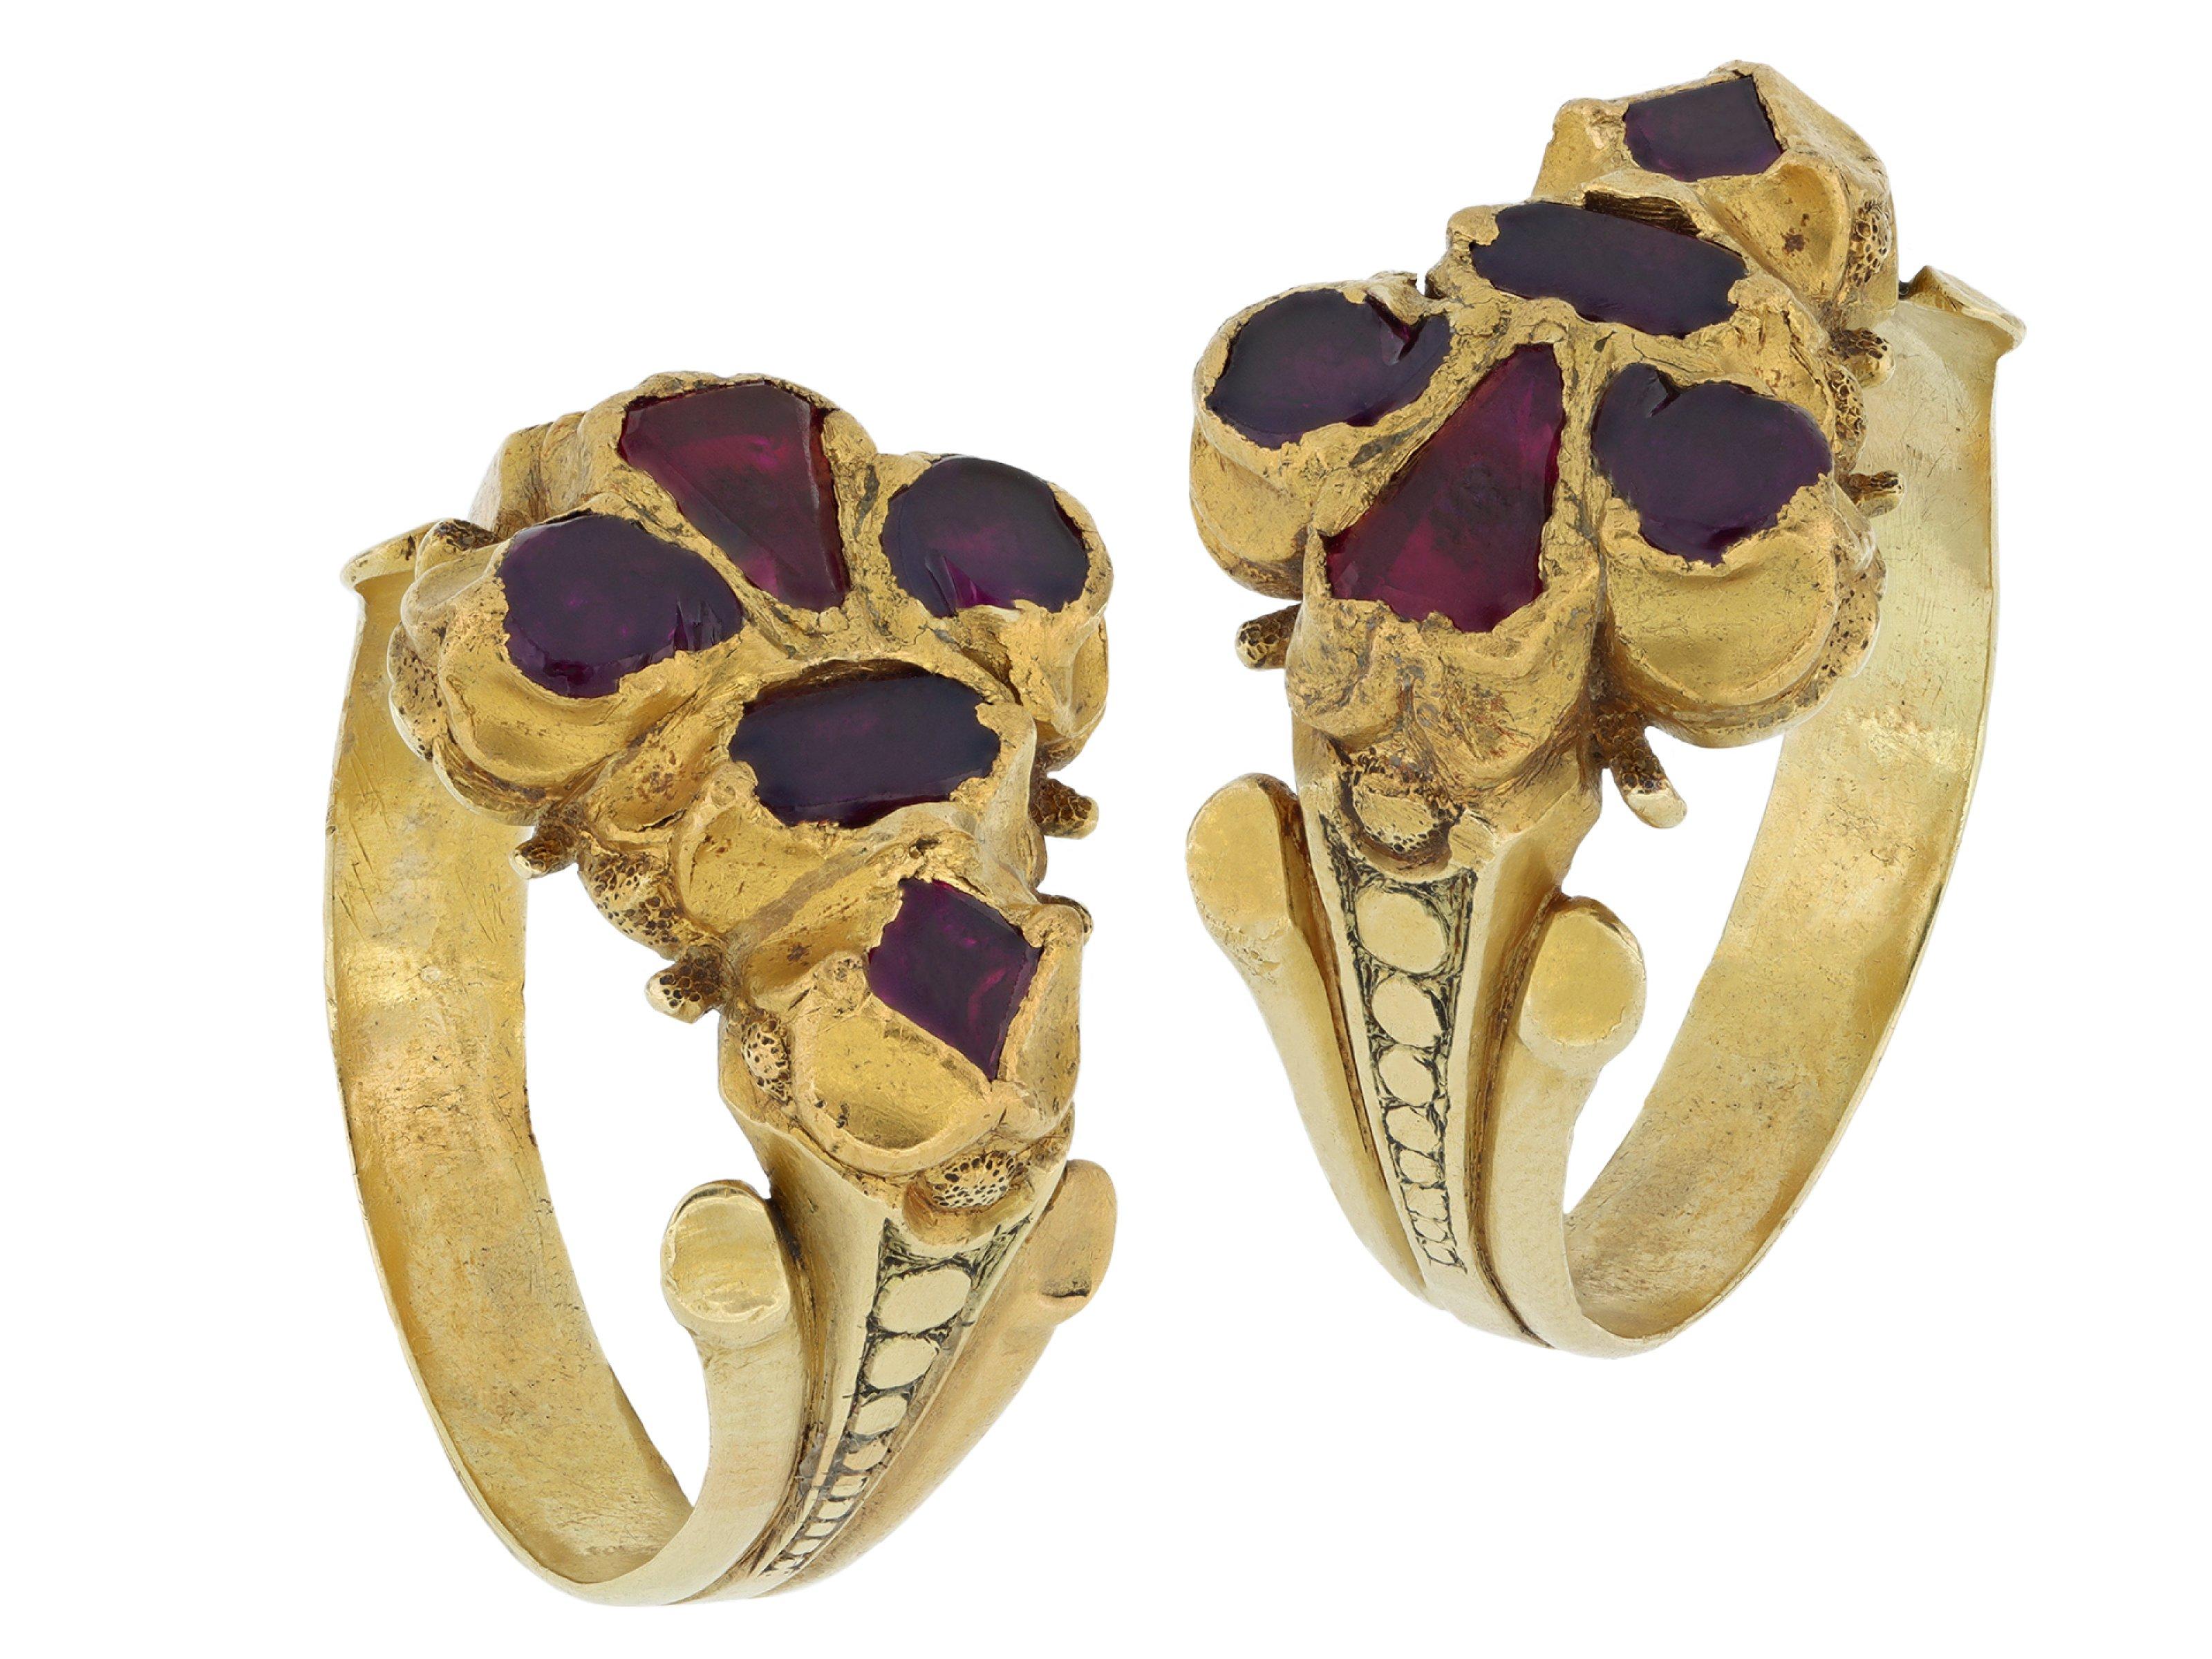 Elizabethan Burmese ruby Fleur-de-lis ring. Set with five table cut natural unenhanced Burmese rubies in closed back quatre-foil settings, to an impressive fleur-de-lis design featuring intricately carved goldwork and closed backholing, leading to